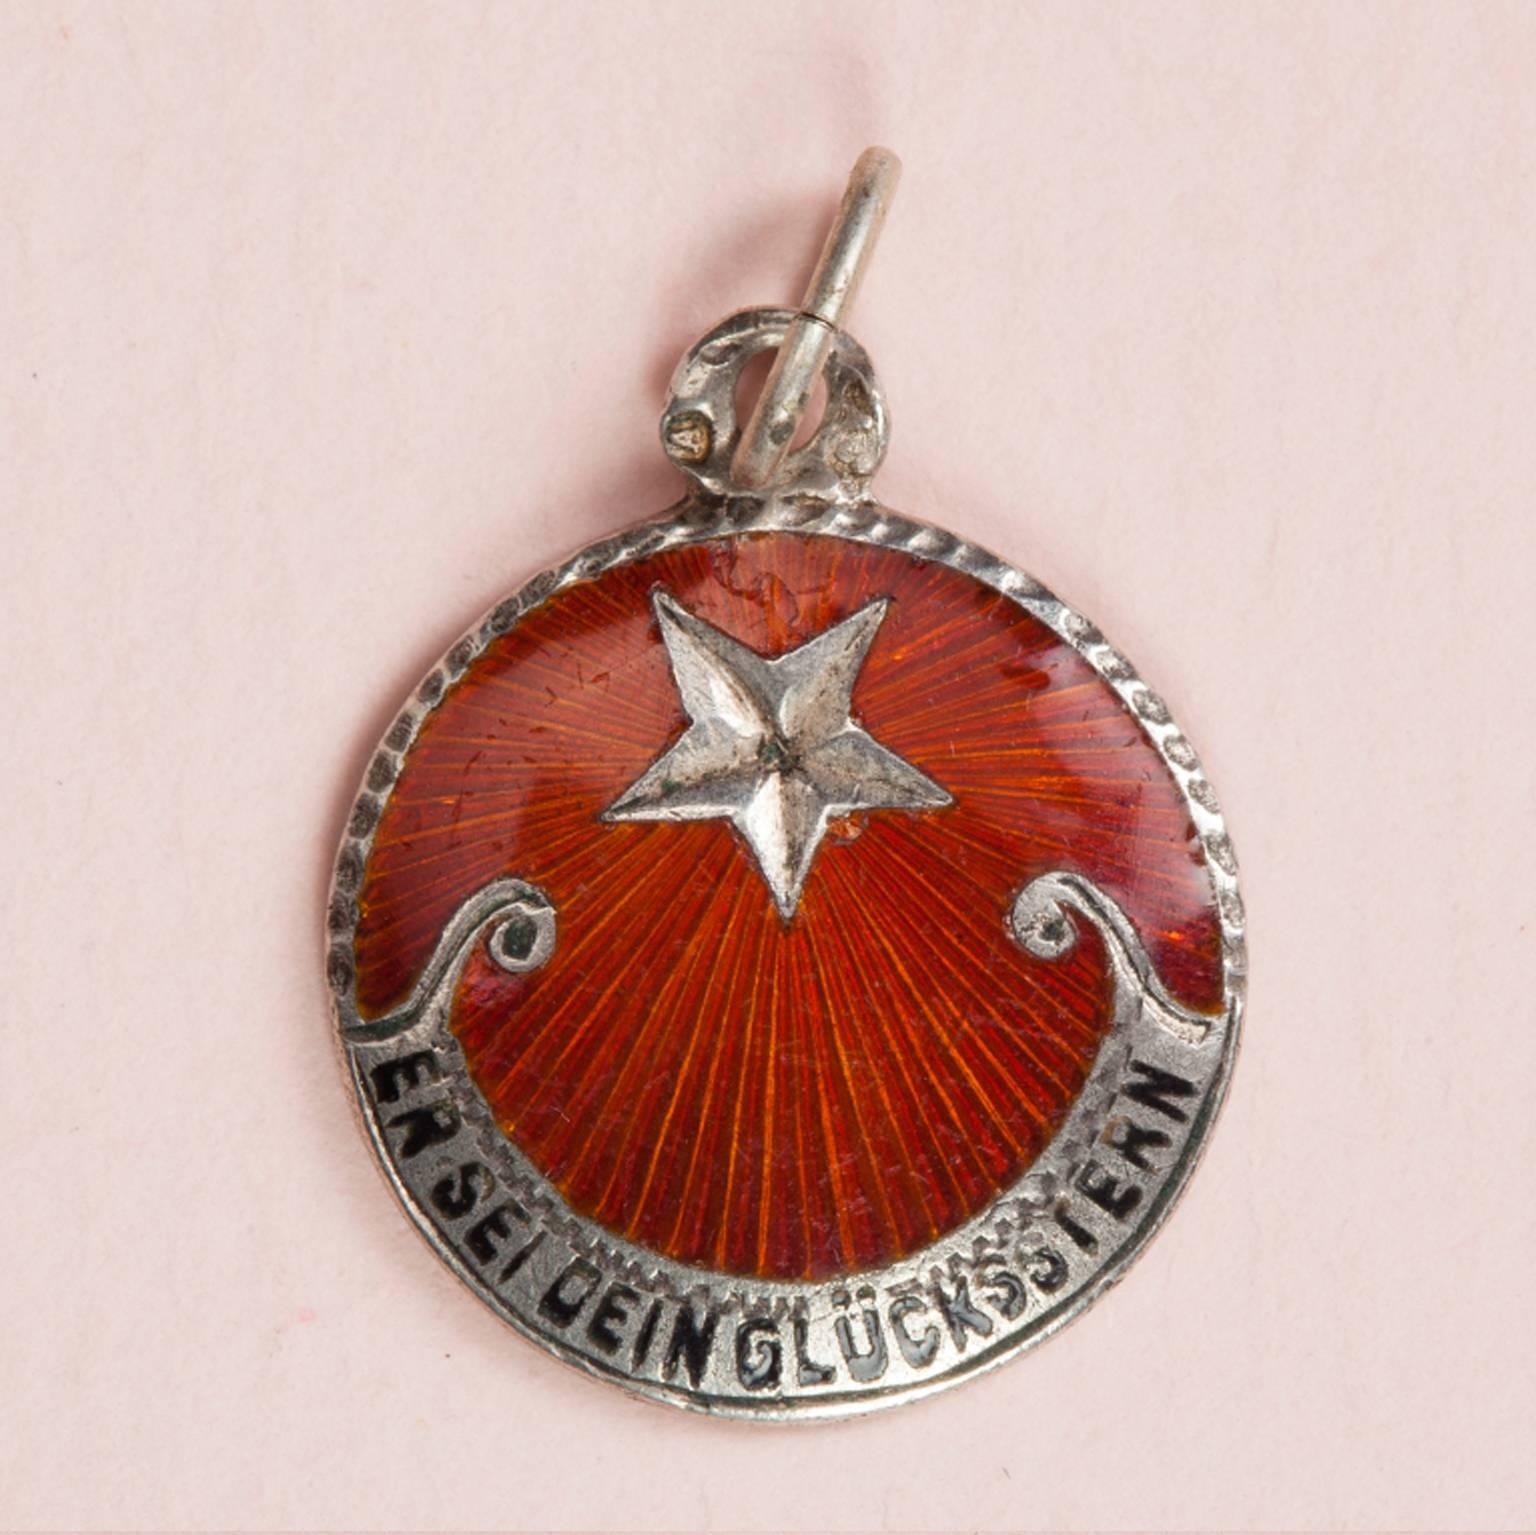 A Silver and Red Enamel Lucky Star Charm with in German 'Er Sei Dein Glücksstern' (this is your lucky star), circa 1920, Germany or Austria.

2 cm